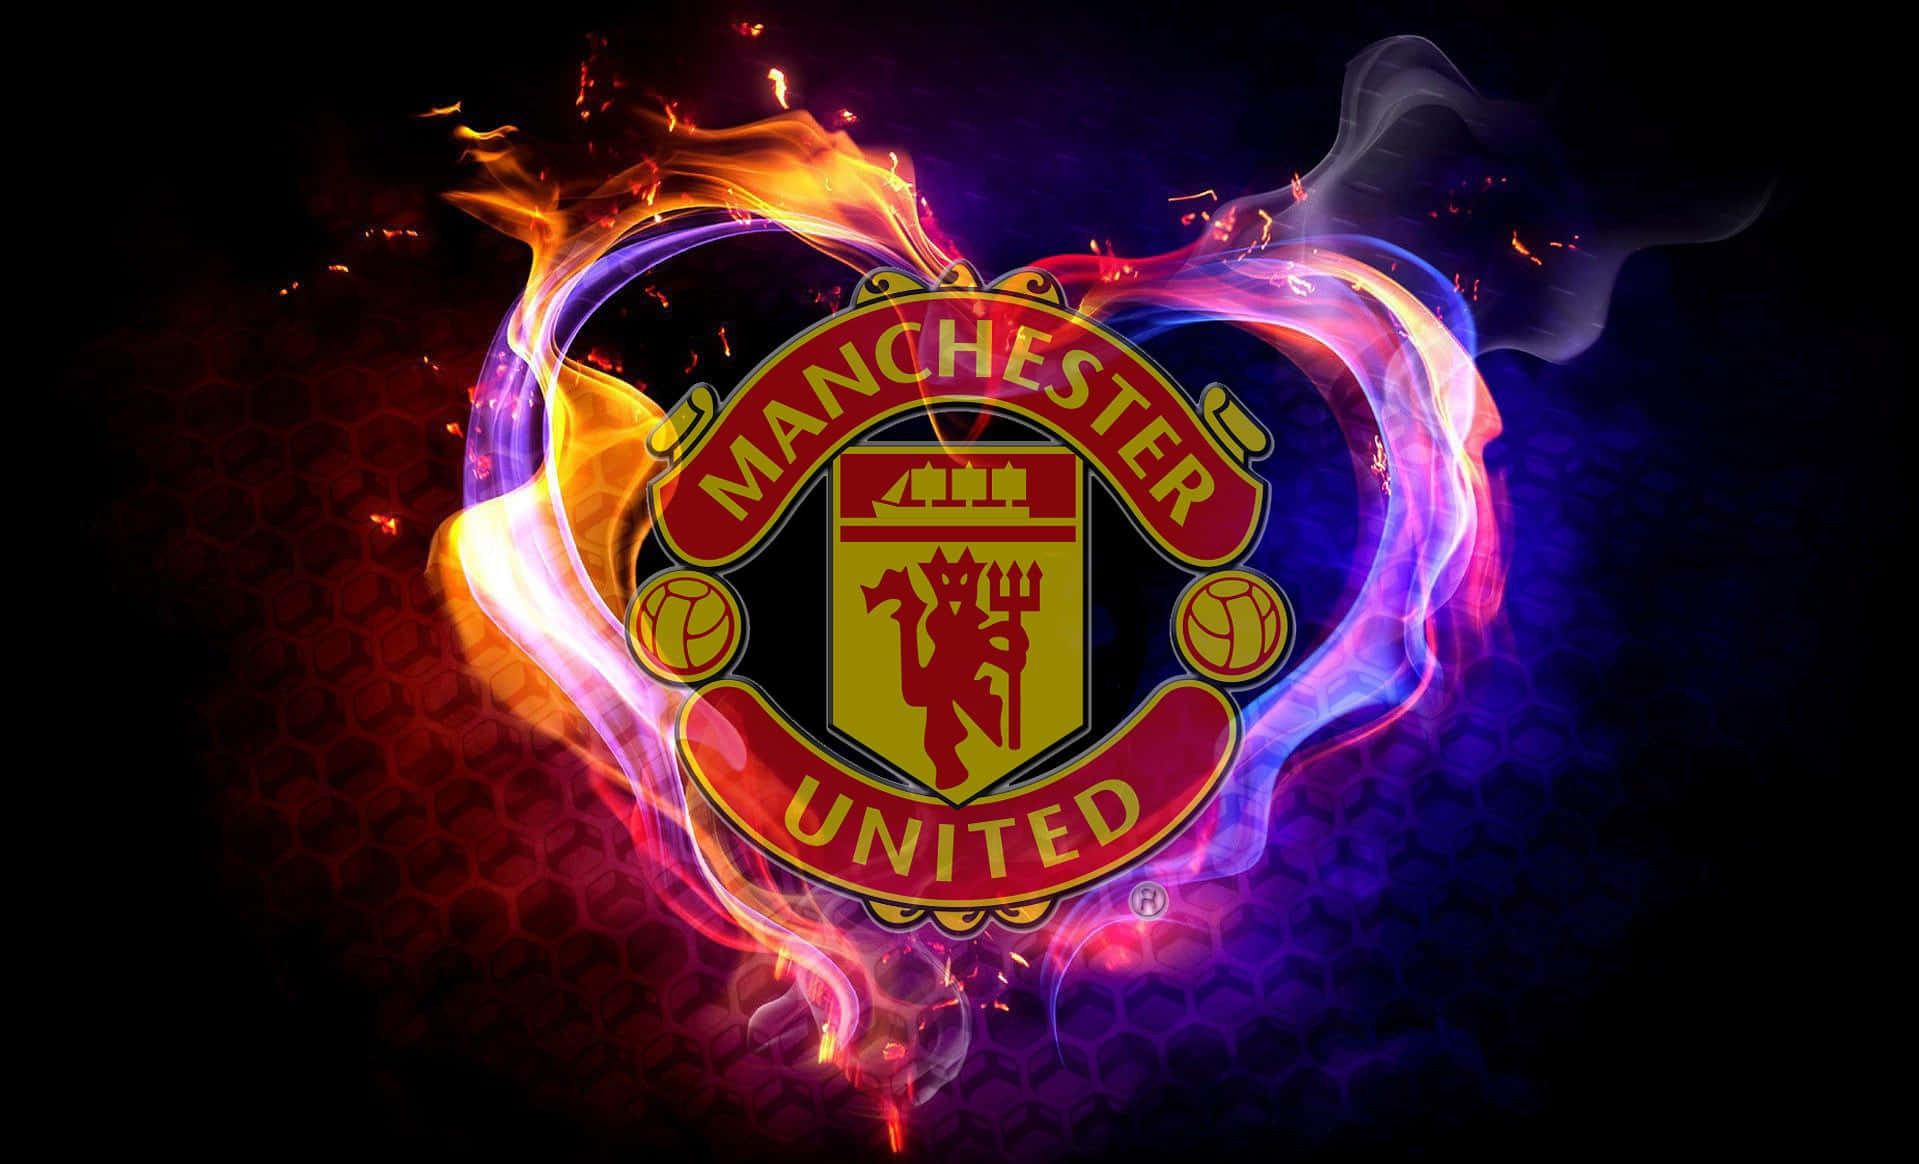 Manchester United Team Logo And Fire Wallpaper